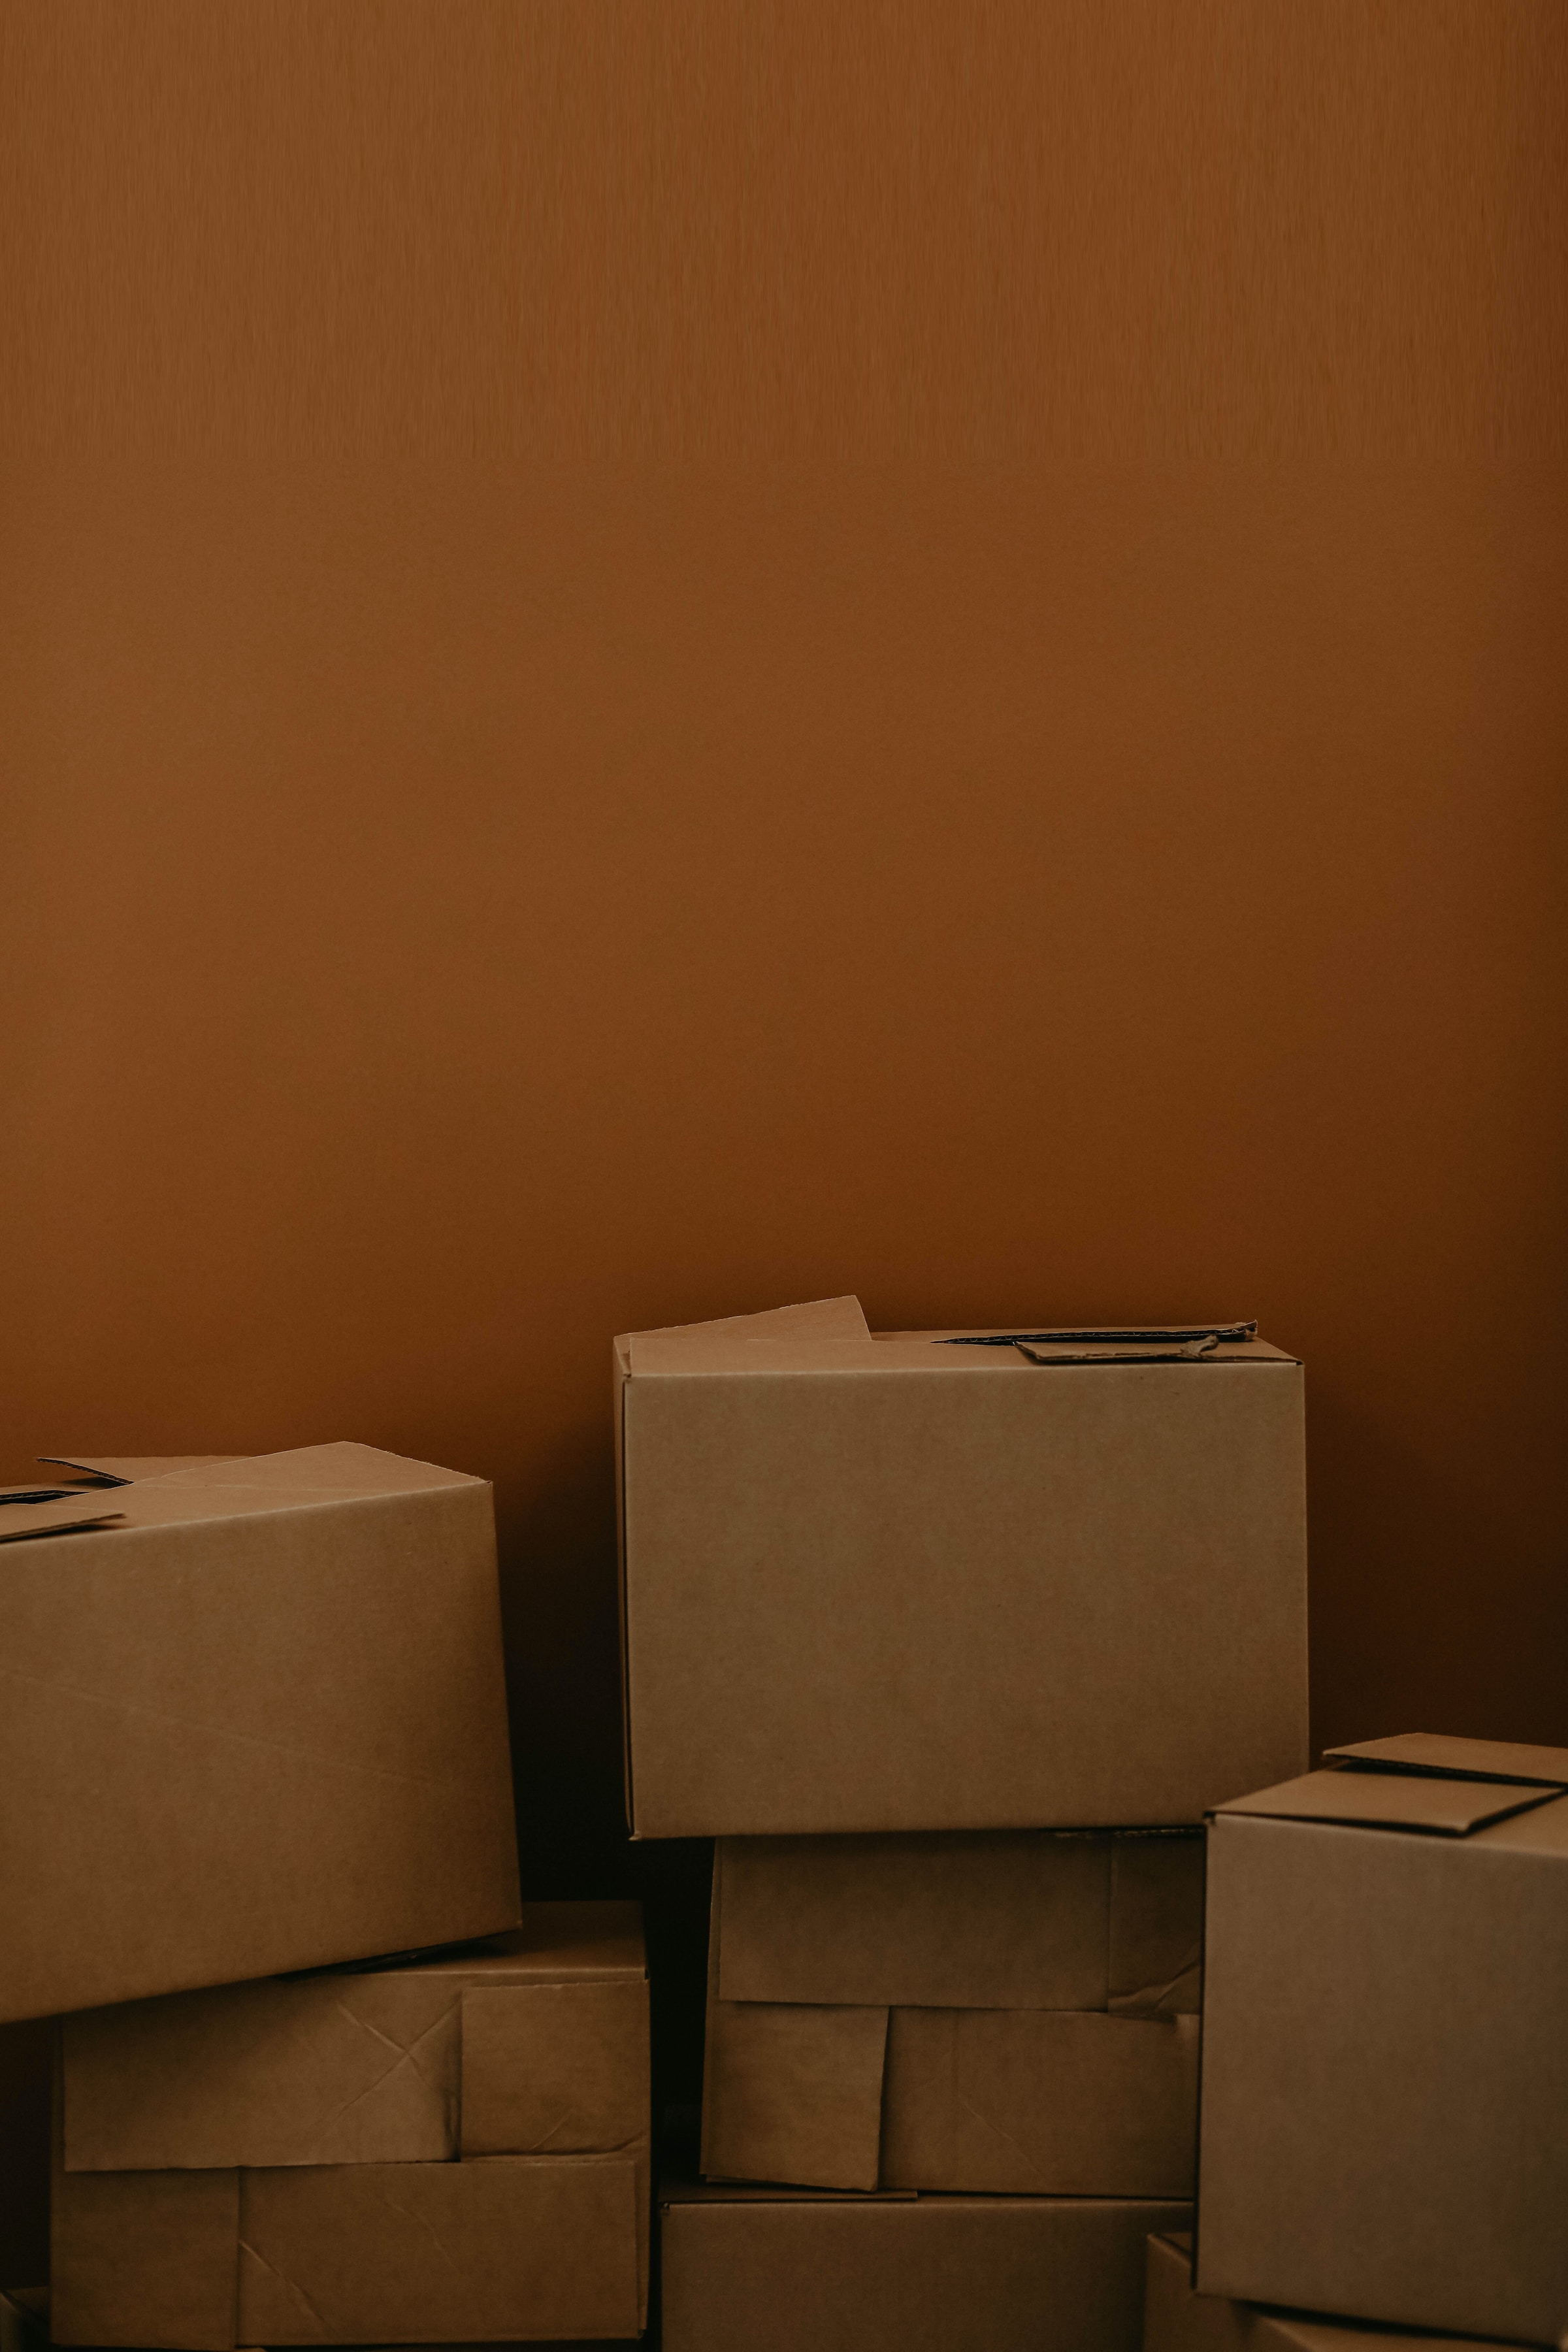 Stack of boxes | Source: Unsplash